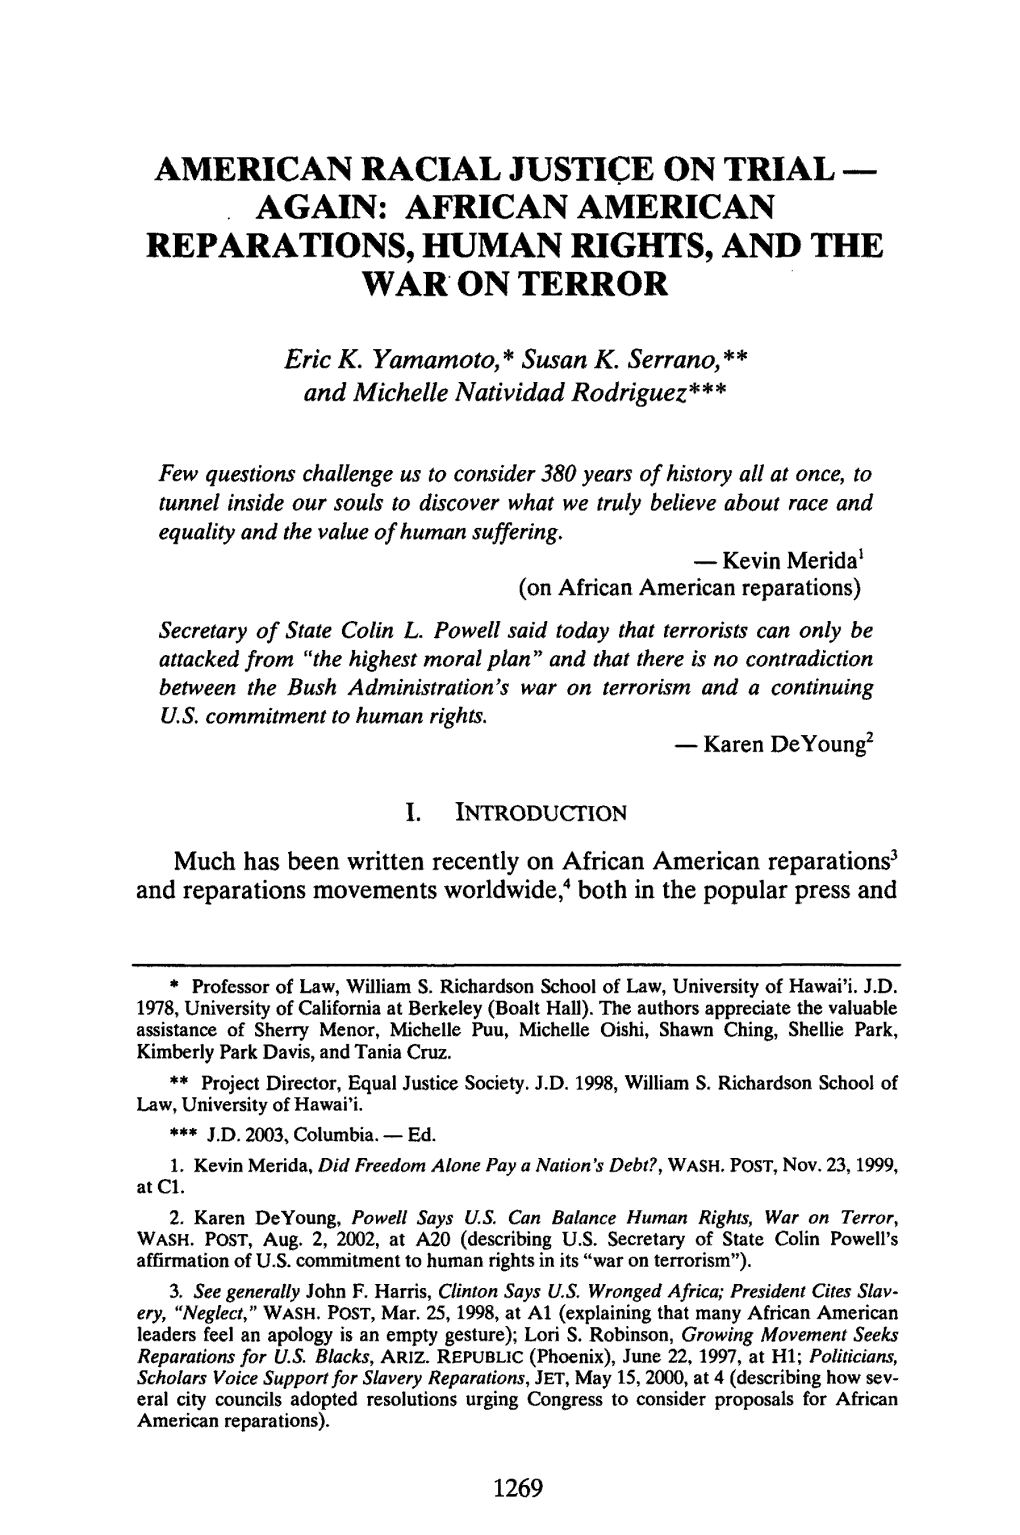 African American Reparations, Human Rights, and the War on Terror